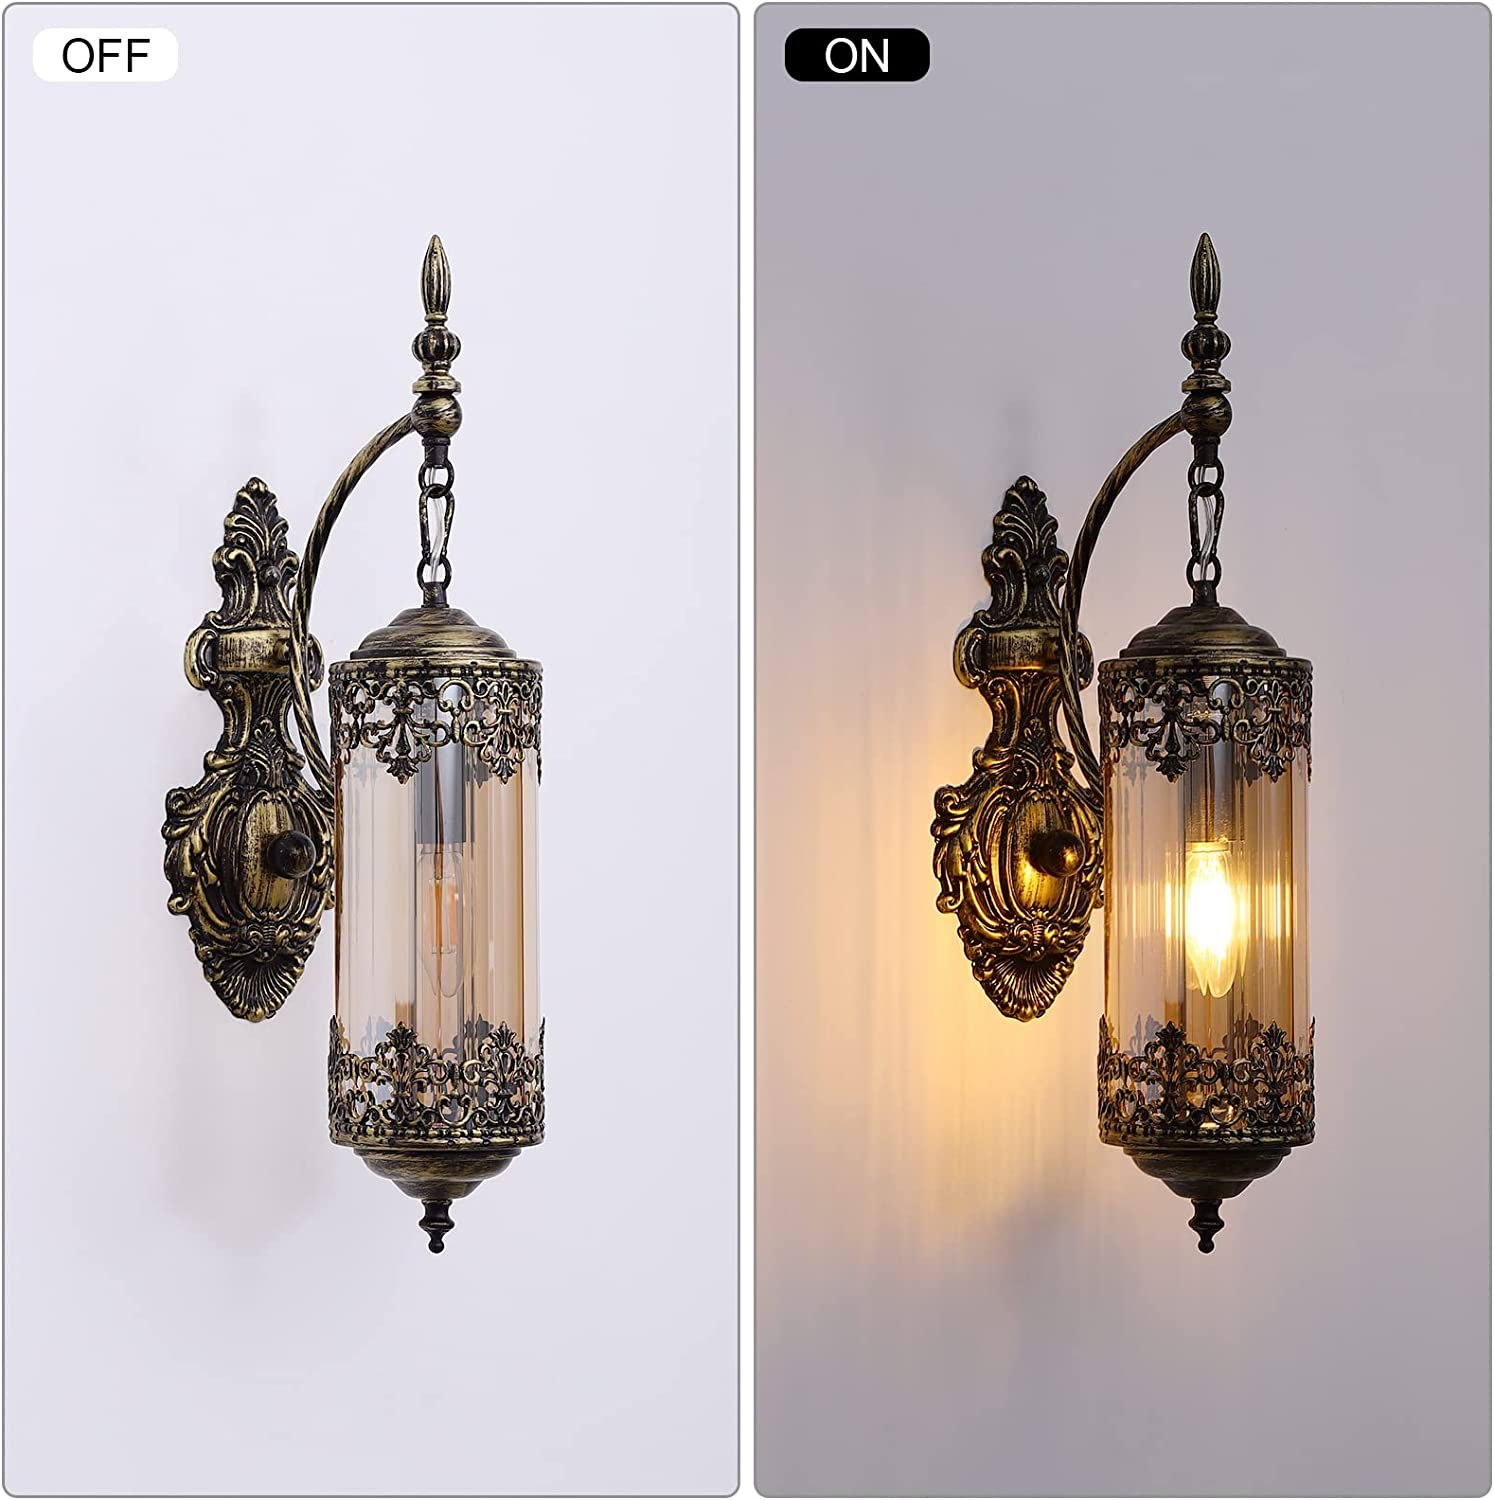 Rust glass wall sconce vintage industrial wall lamp